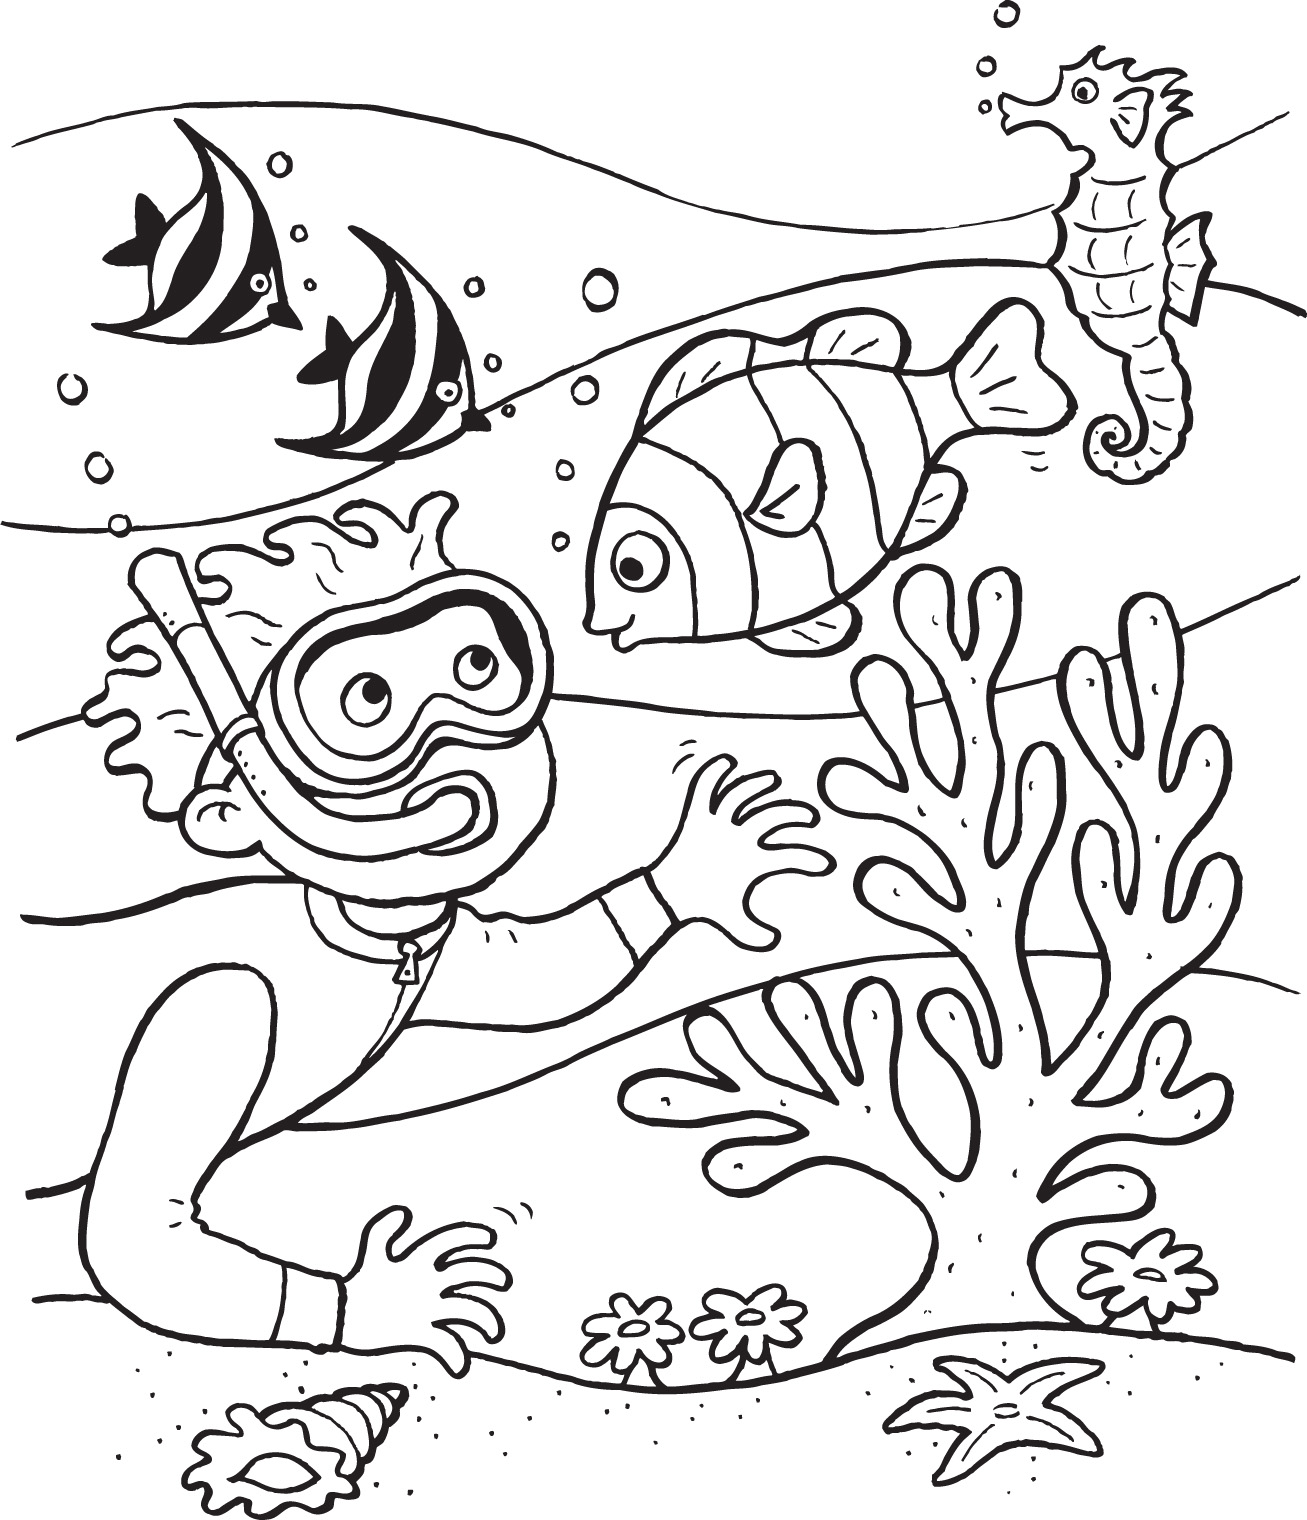 under the ocean printable coloring pages - photo #40